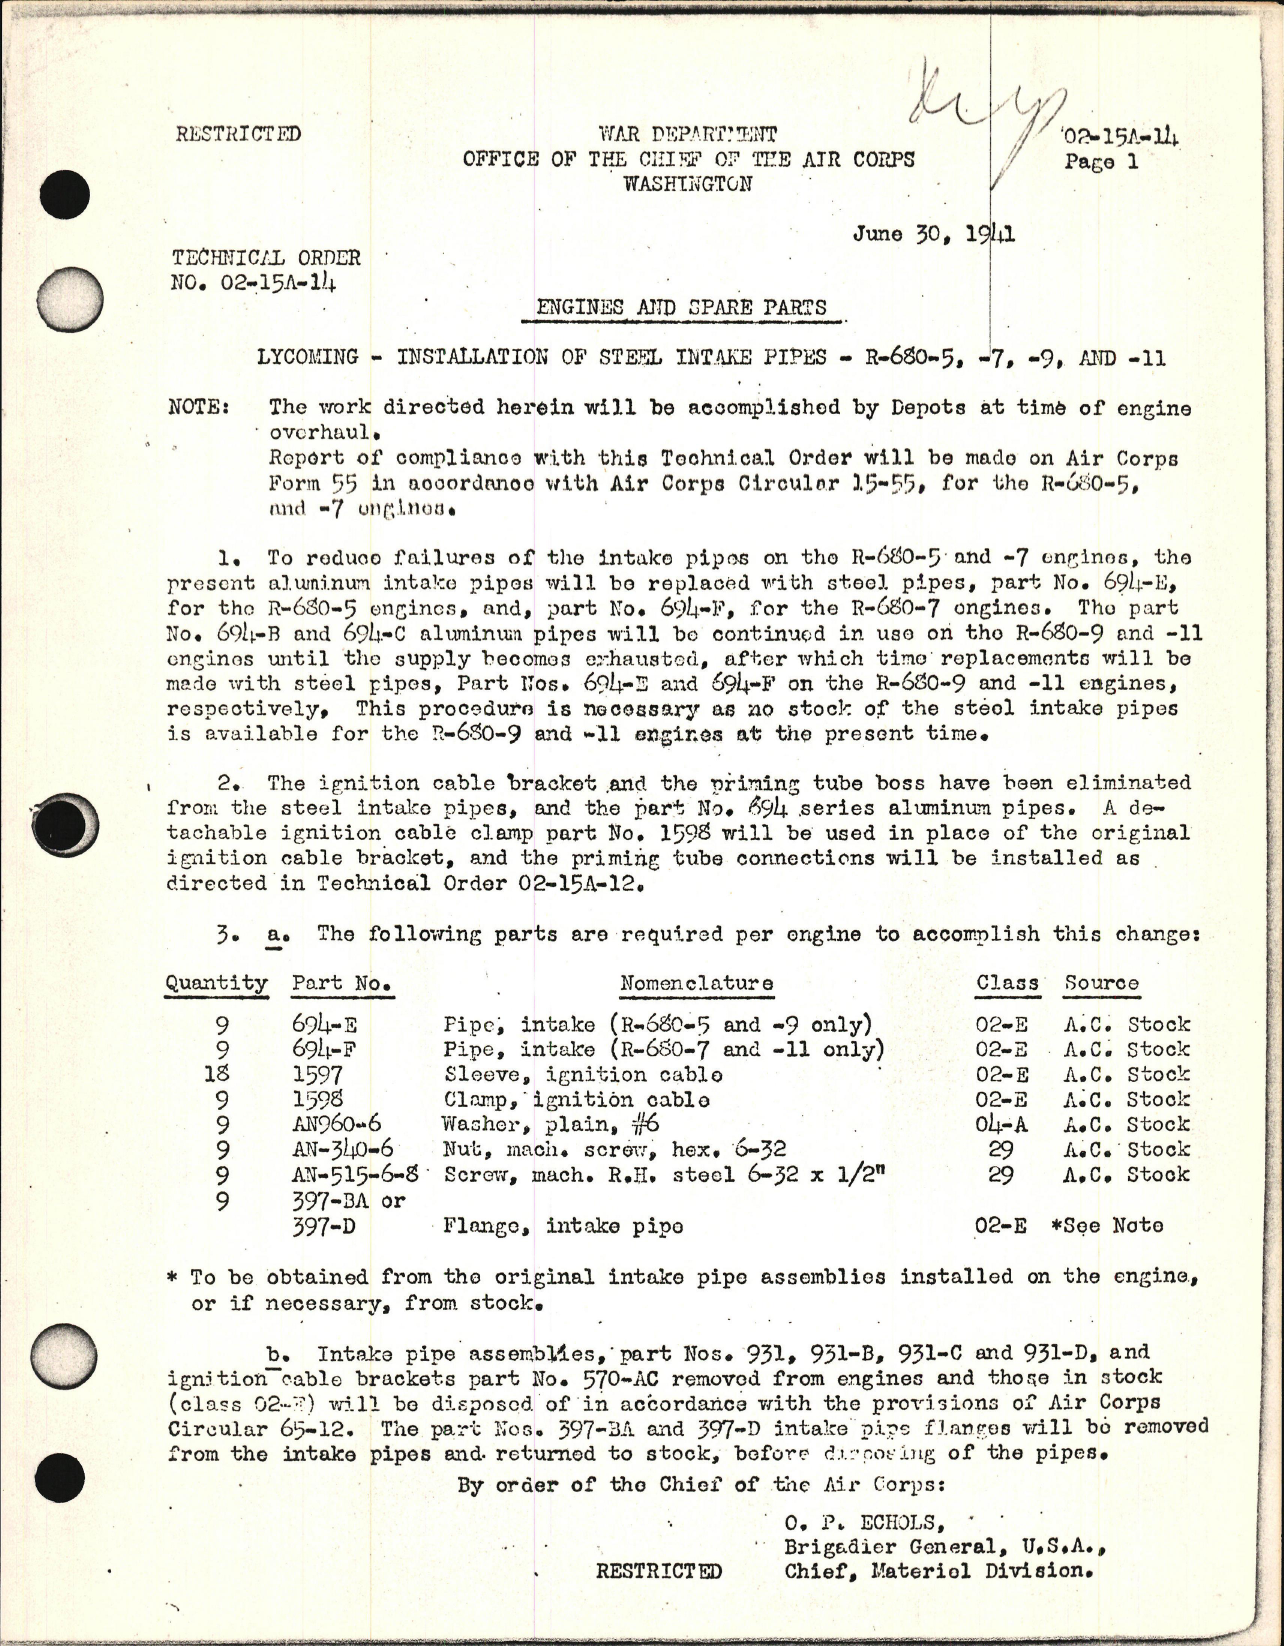 Sample page 1 from AirCorps Library document: Installation of Steel Intake Pipes for R-680-5, -7, -9, and -11